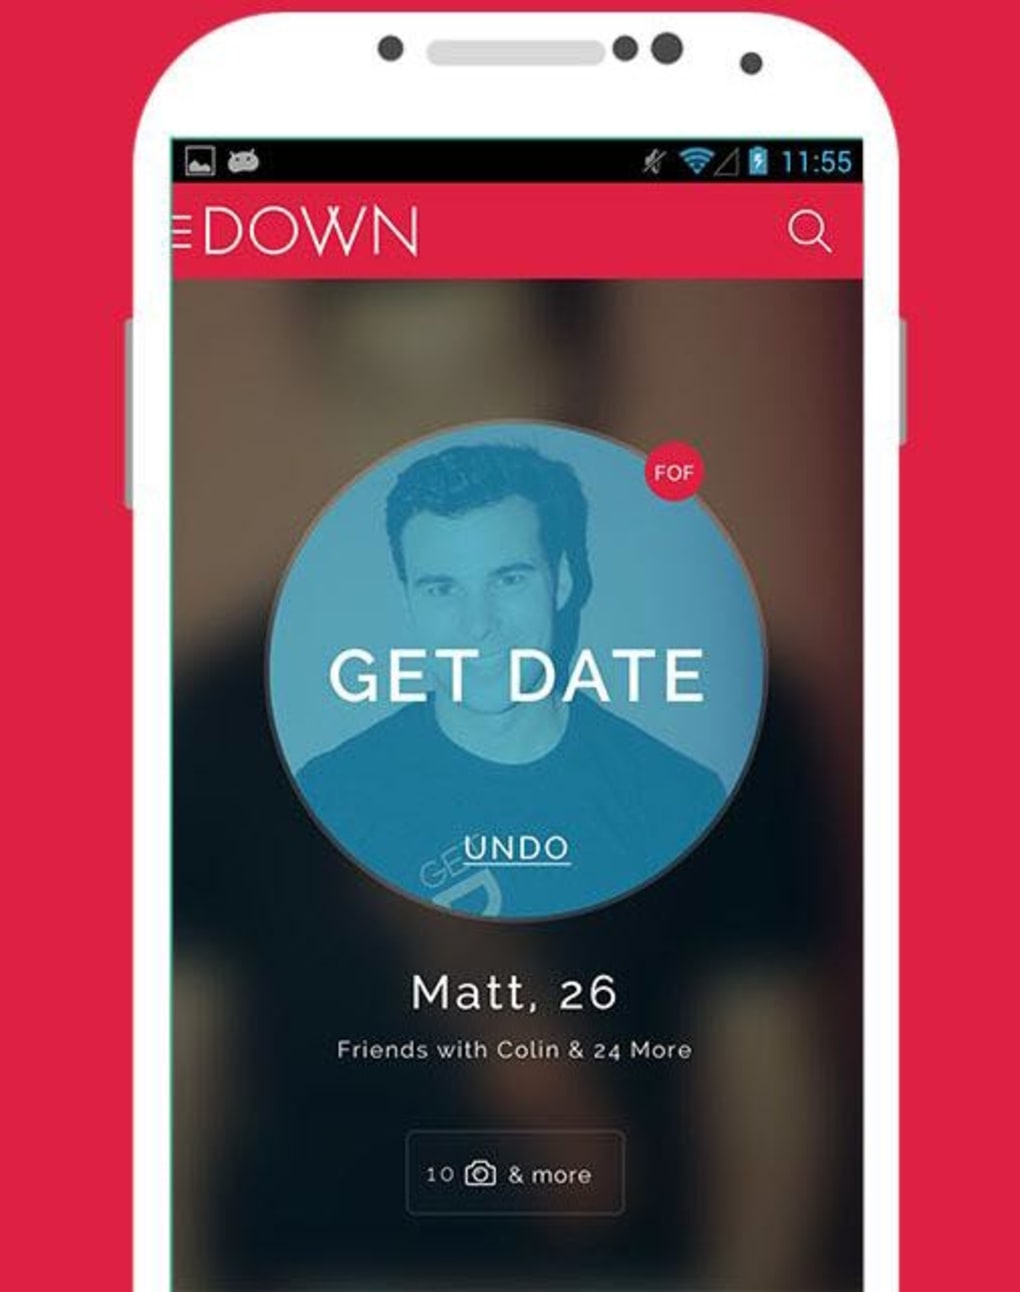 Down app. Down dating. Dating with friends app. App is down. Down Hook up app.